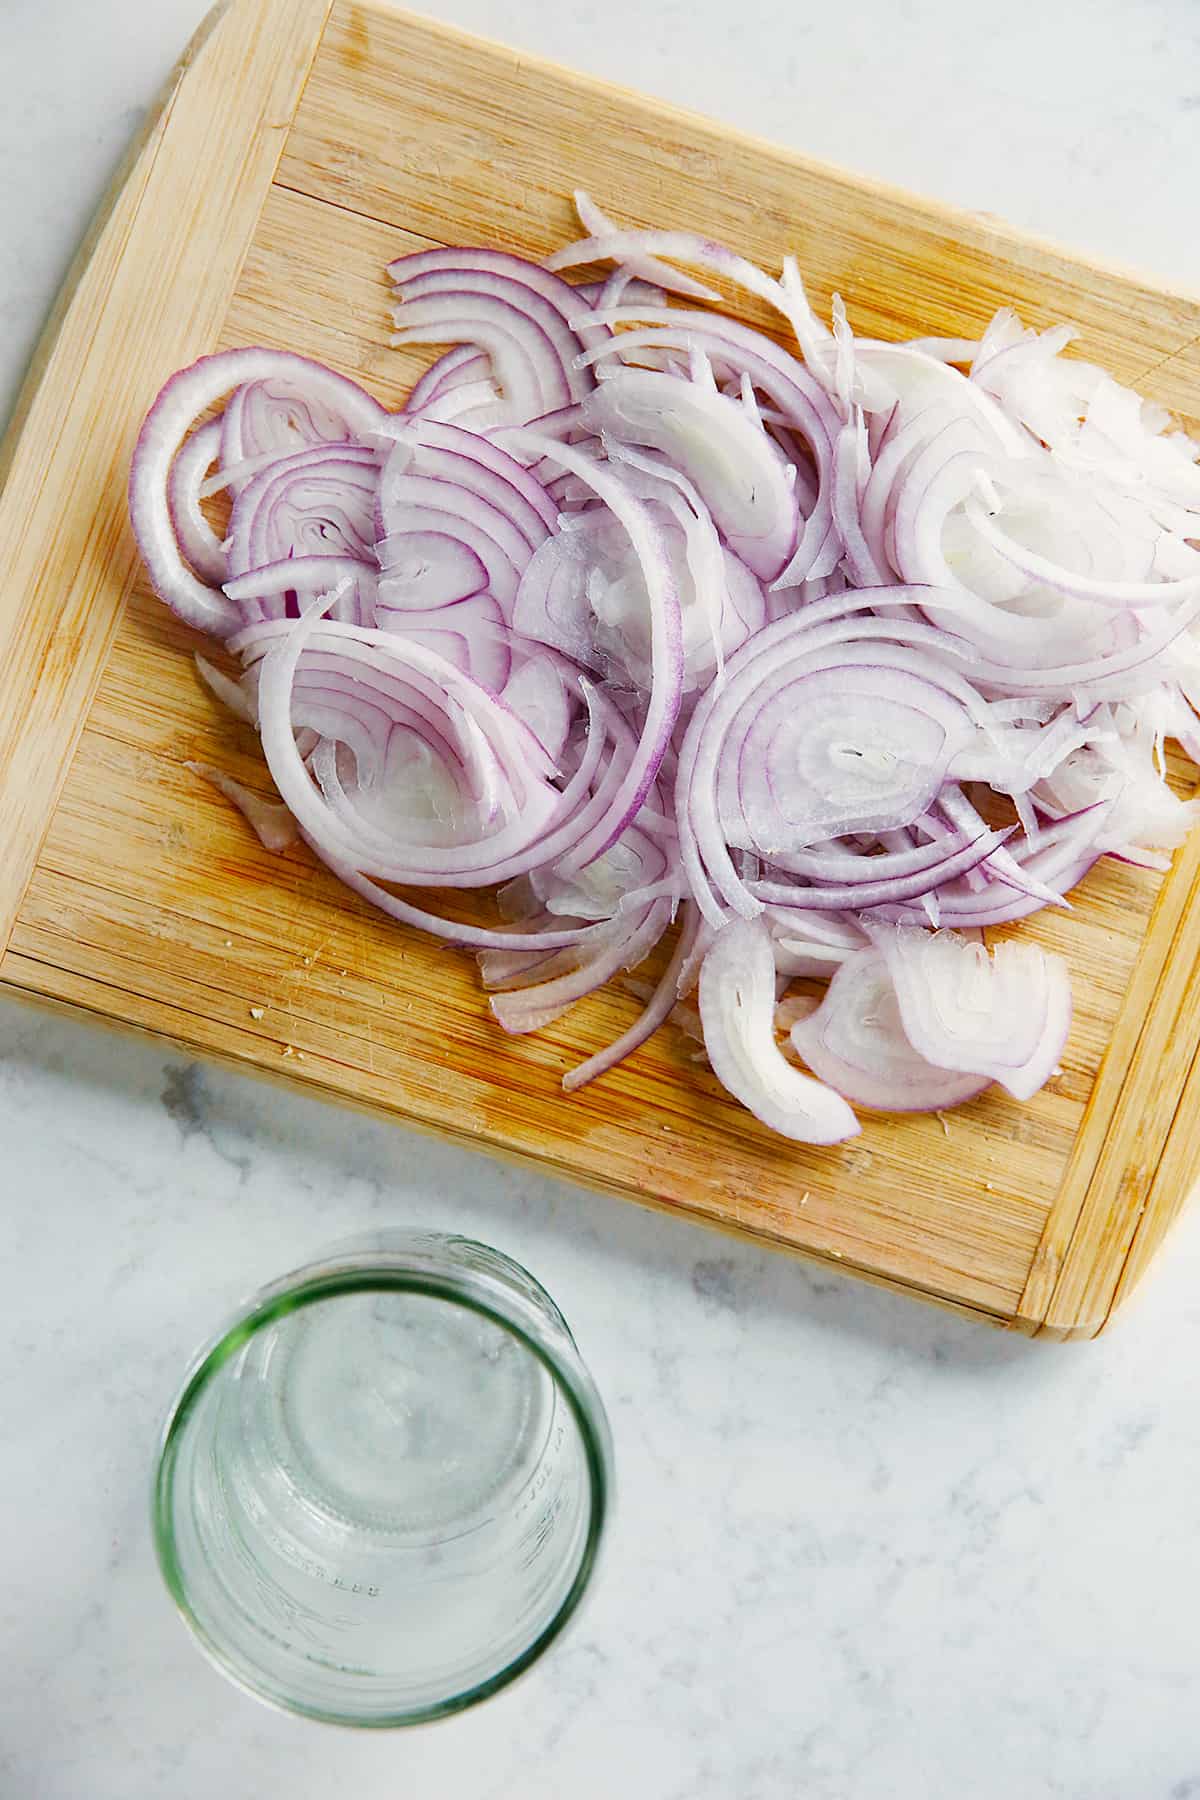 sliced red onions on a cutting board from above.